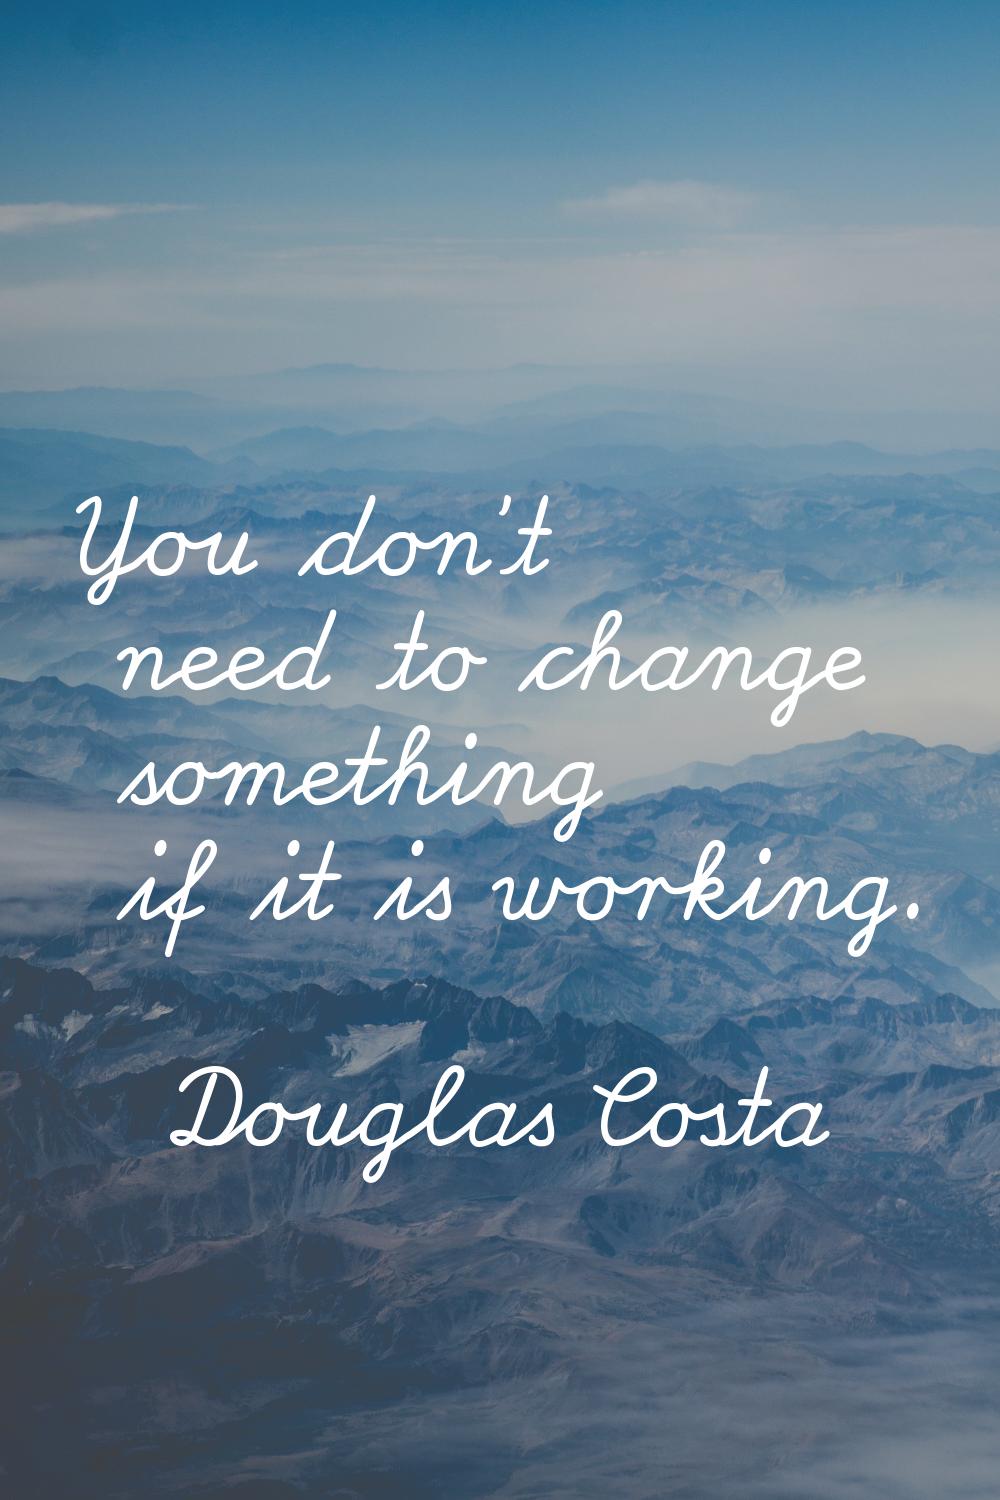 You don't need to change something if it is working.